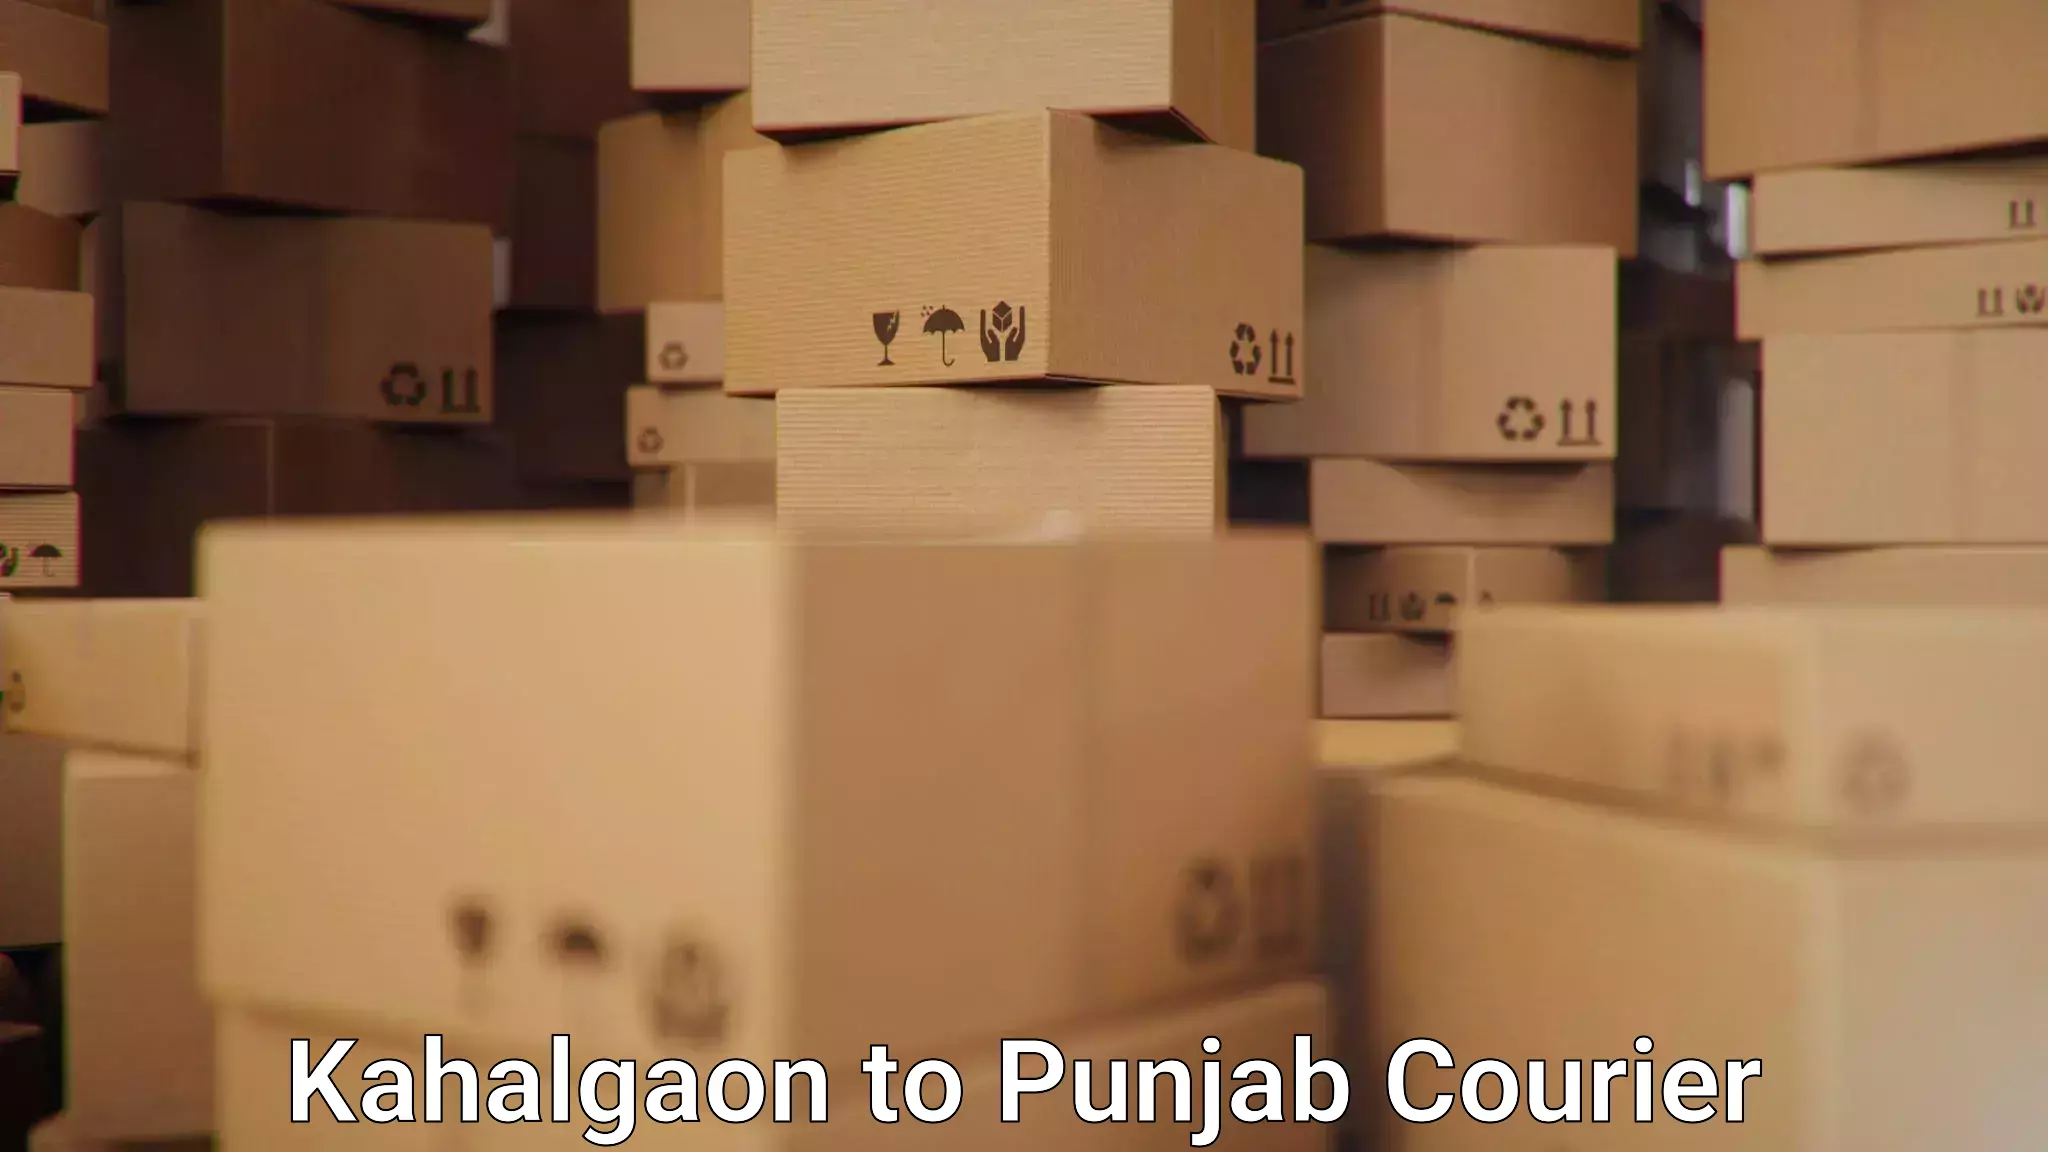 End-to-end delivery Kahalgaon to Faridkot